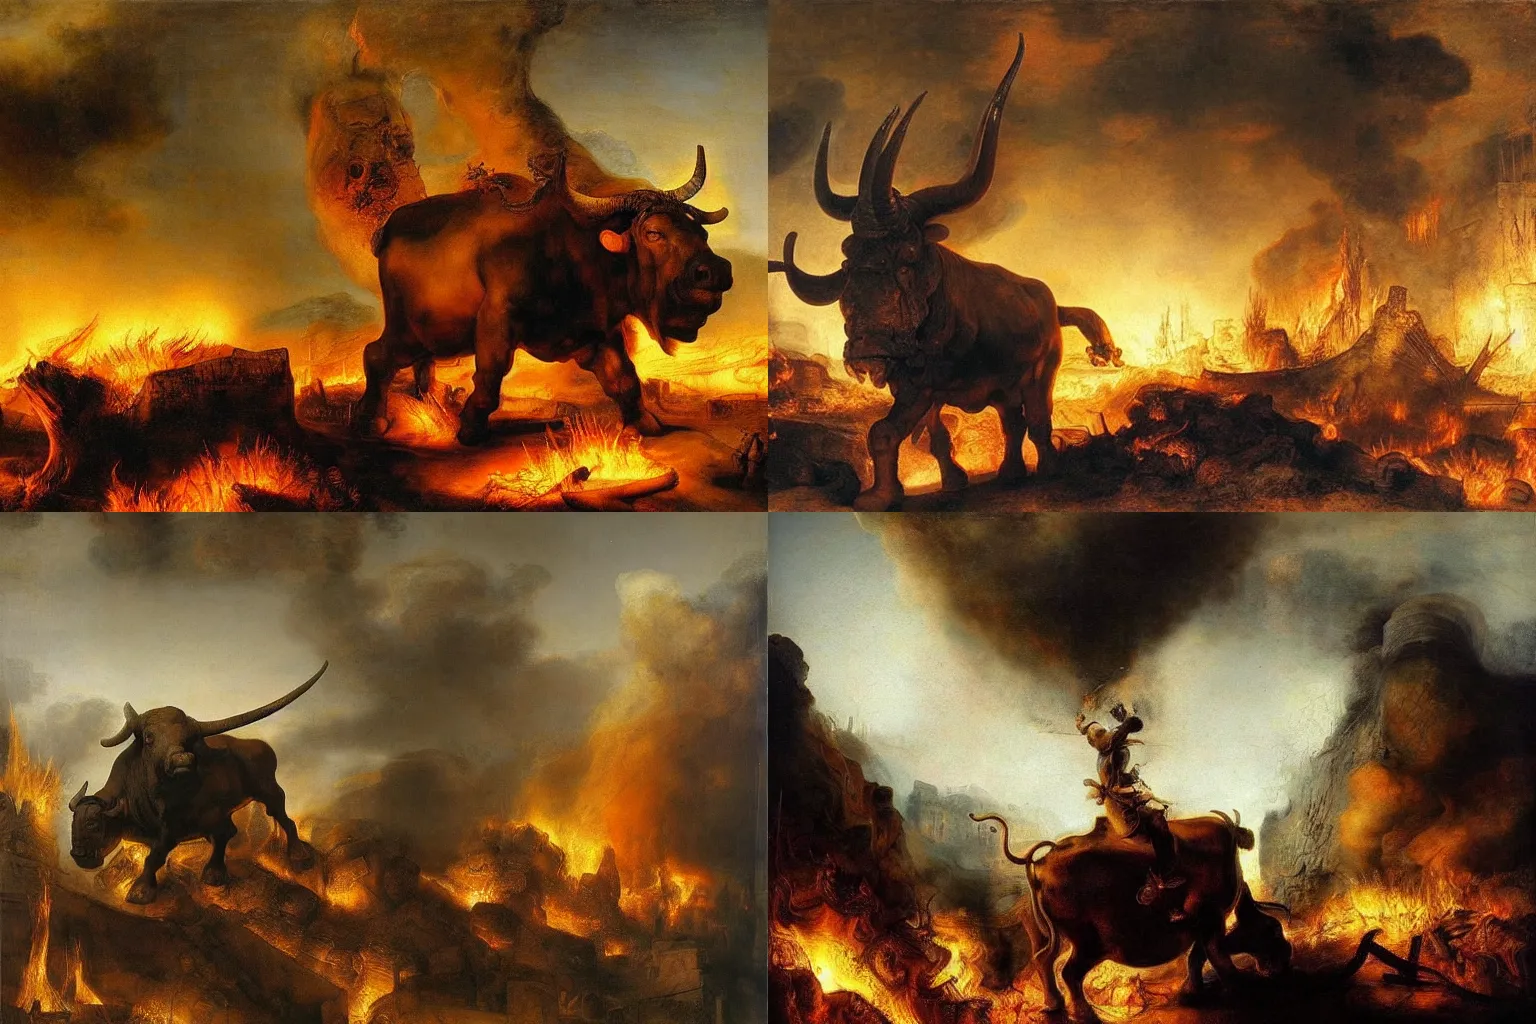 Prompt: giant bull man. Large curved horns. It stands tall over the burning ruins of an ancient city on fire. Oil painting by Rembrandt.